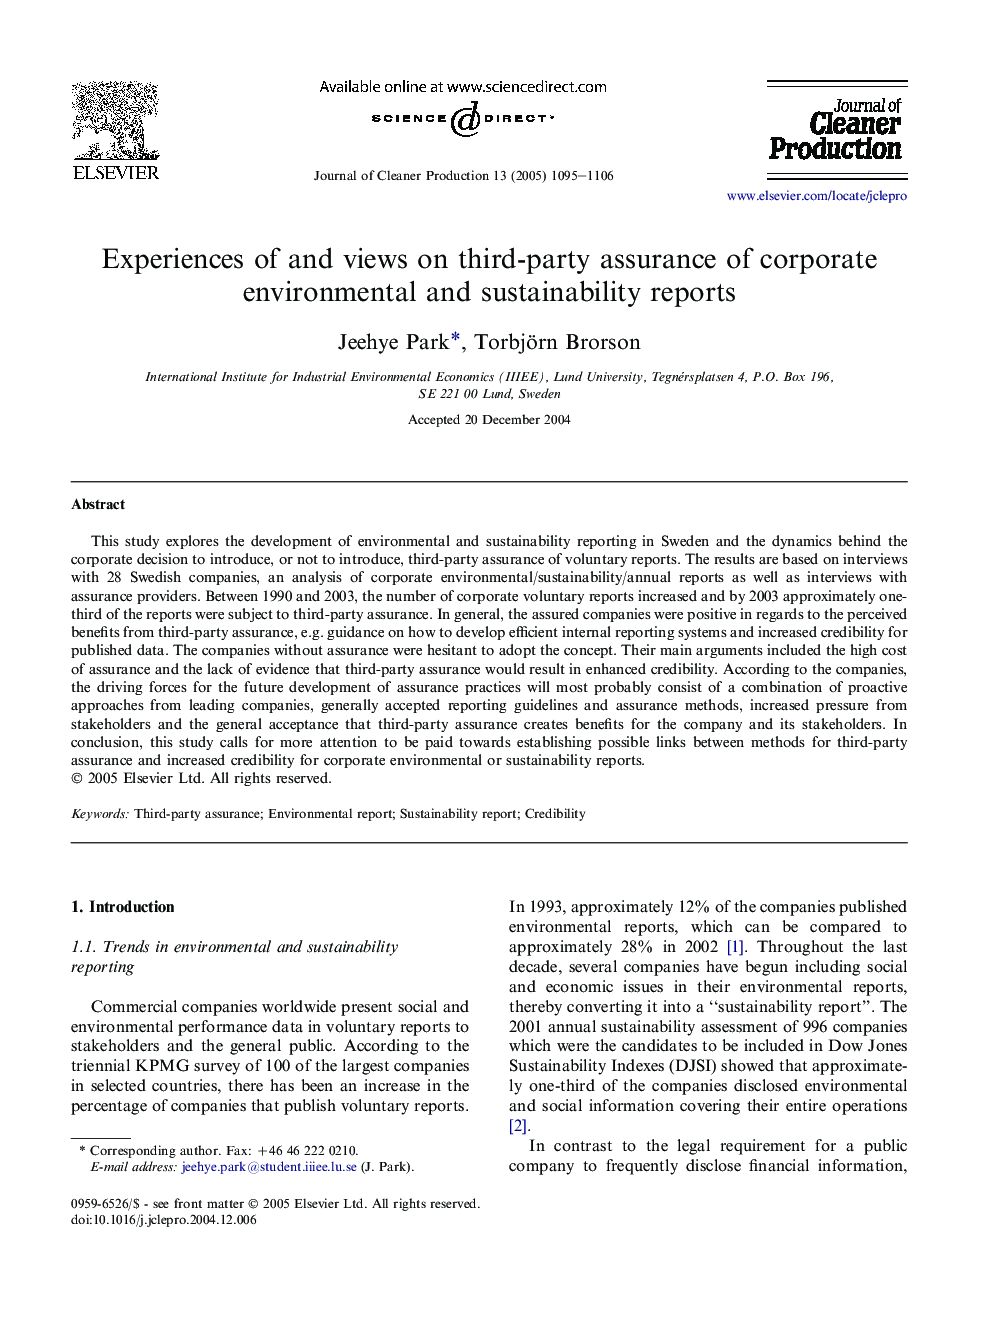 Experiences of and views on third-party assurance of corporate environmental and sustainability reports